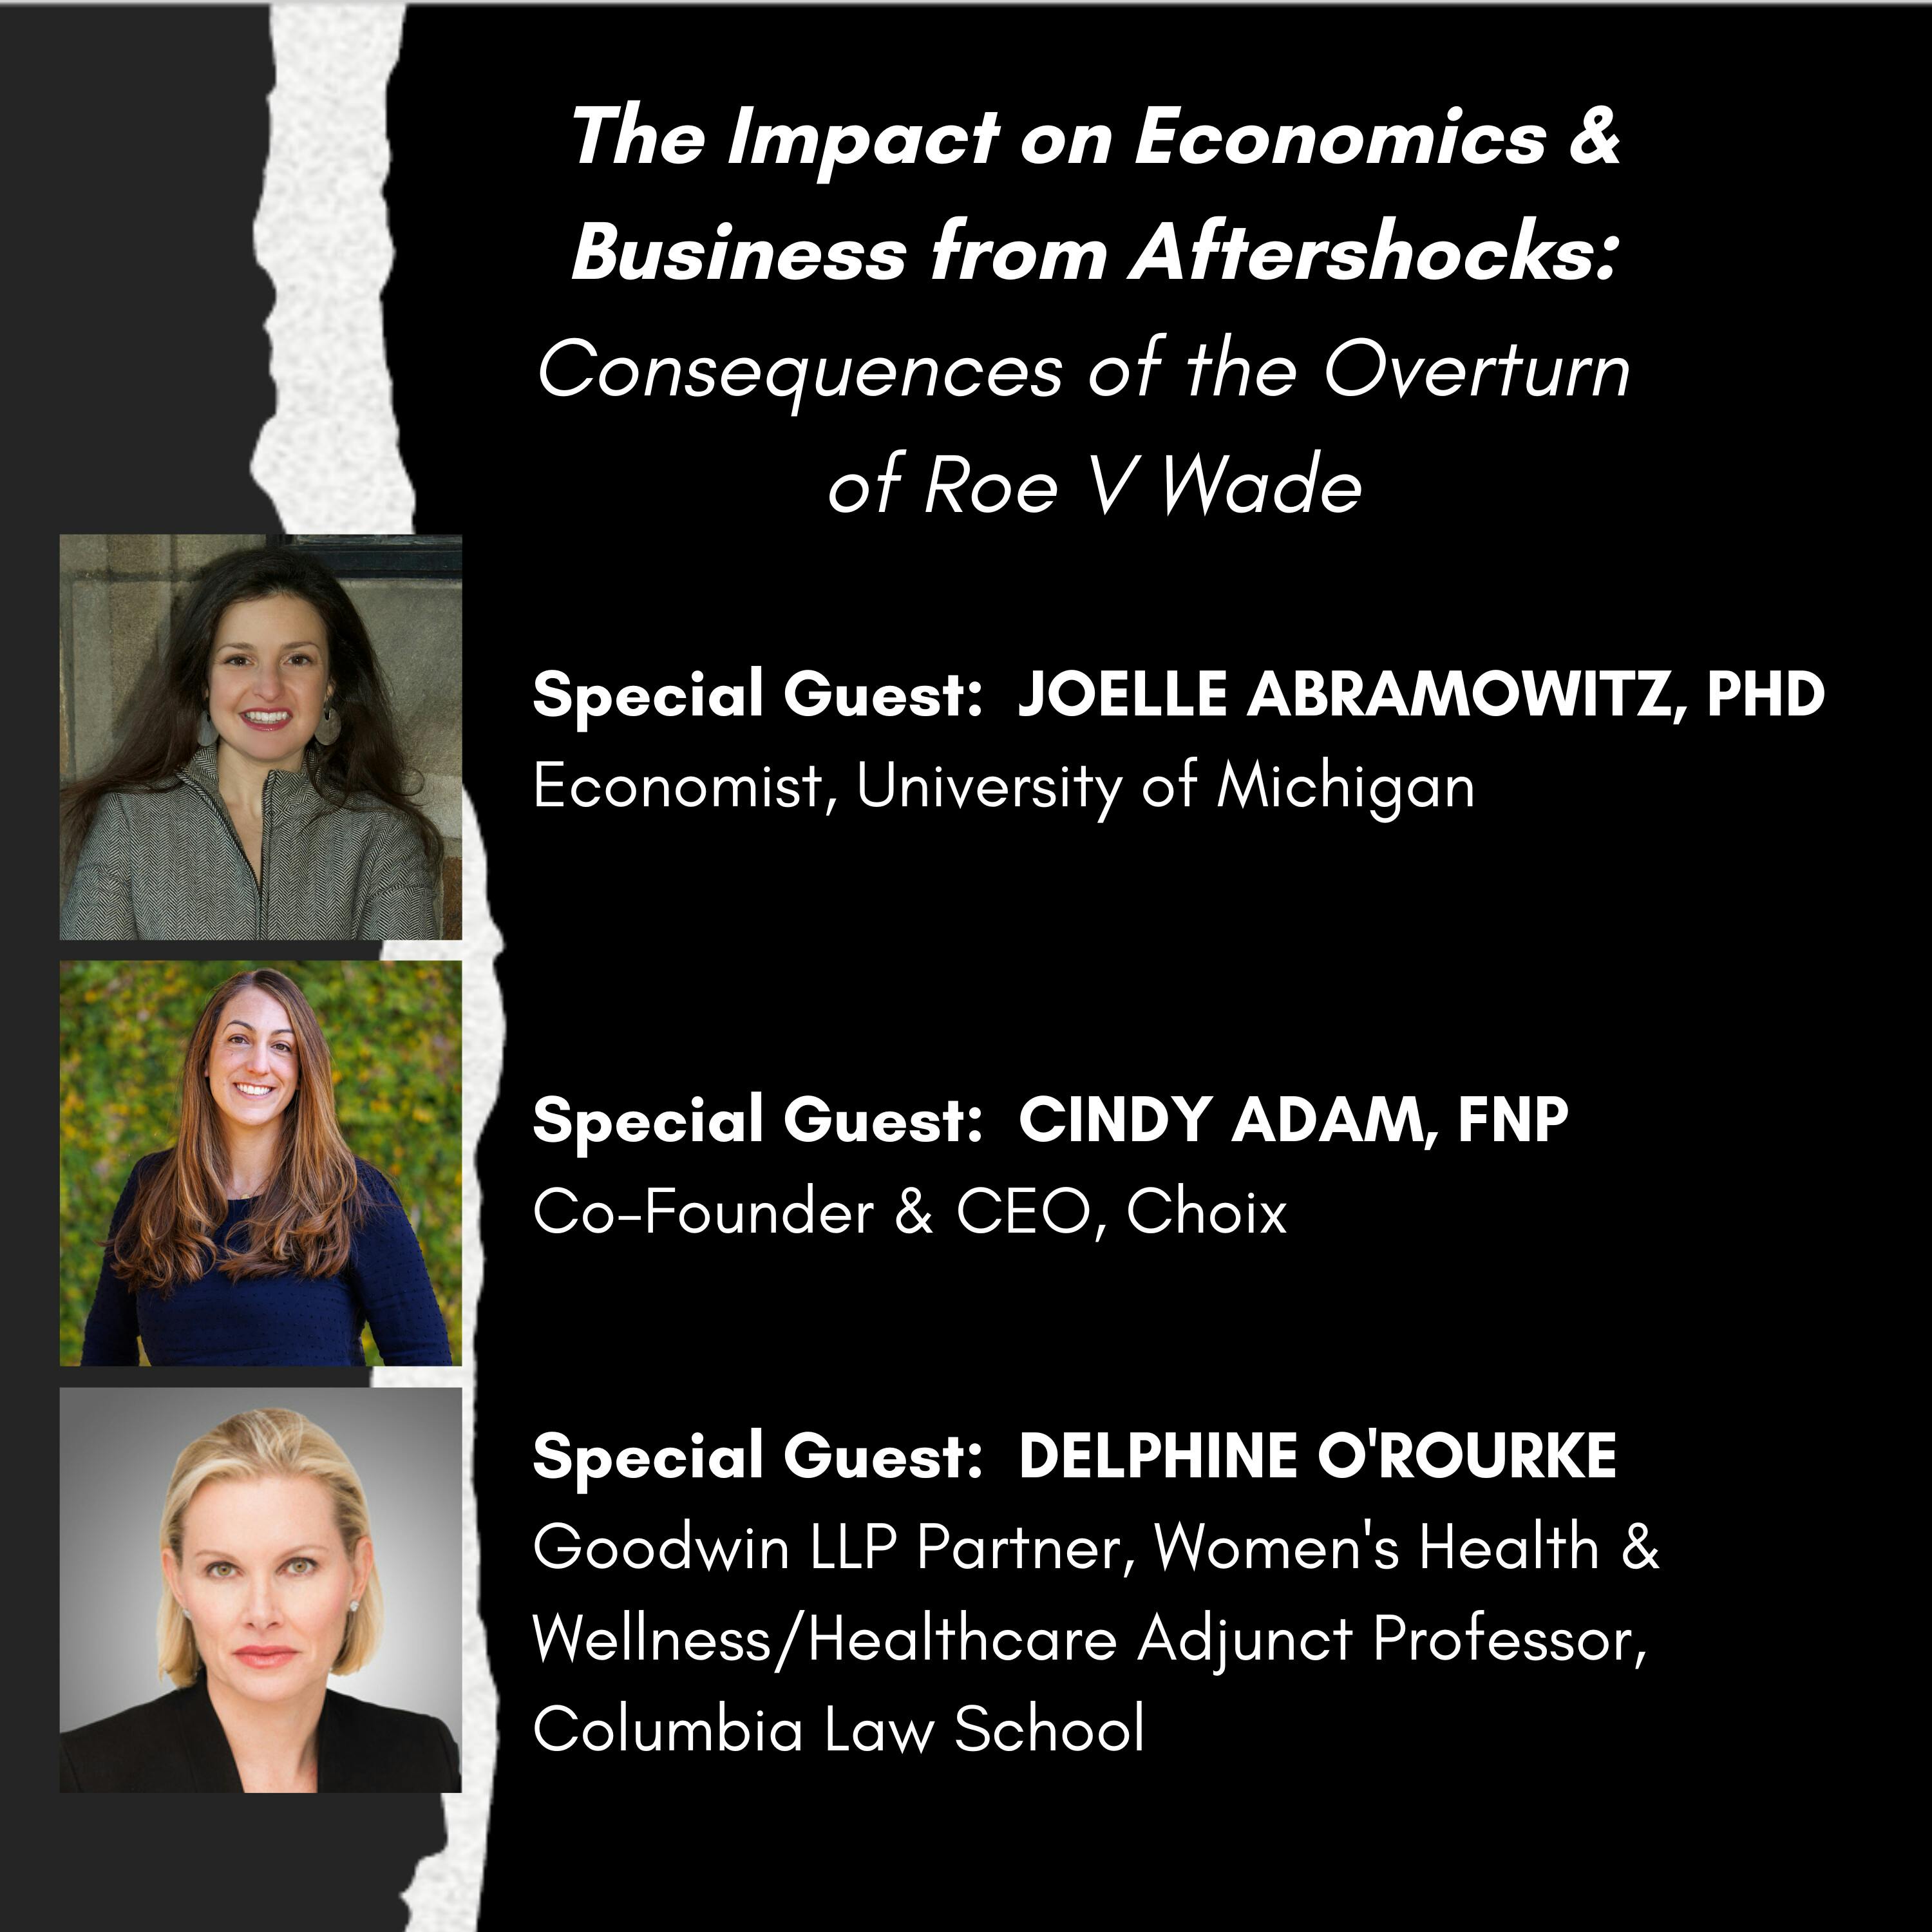 The Impact on Economics and Business from Aftershocks: Consequences of the Overturn of Roe v Wade